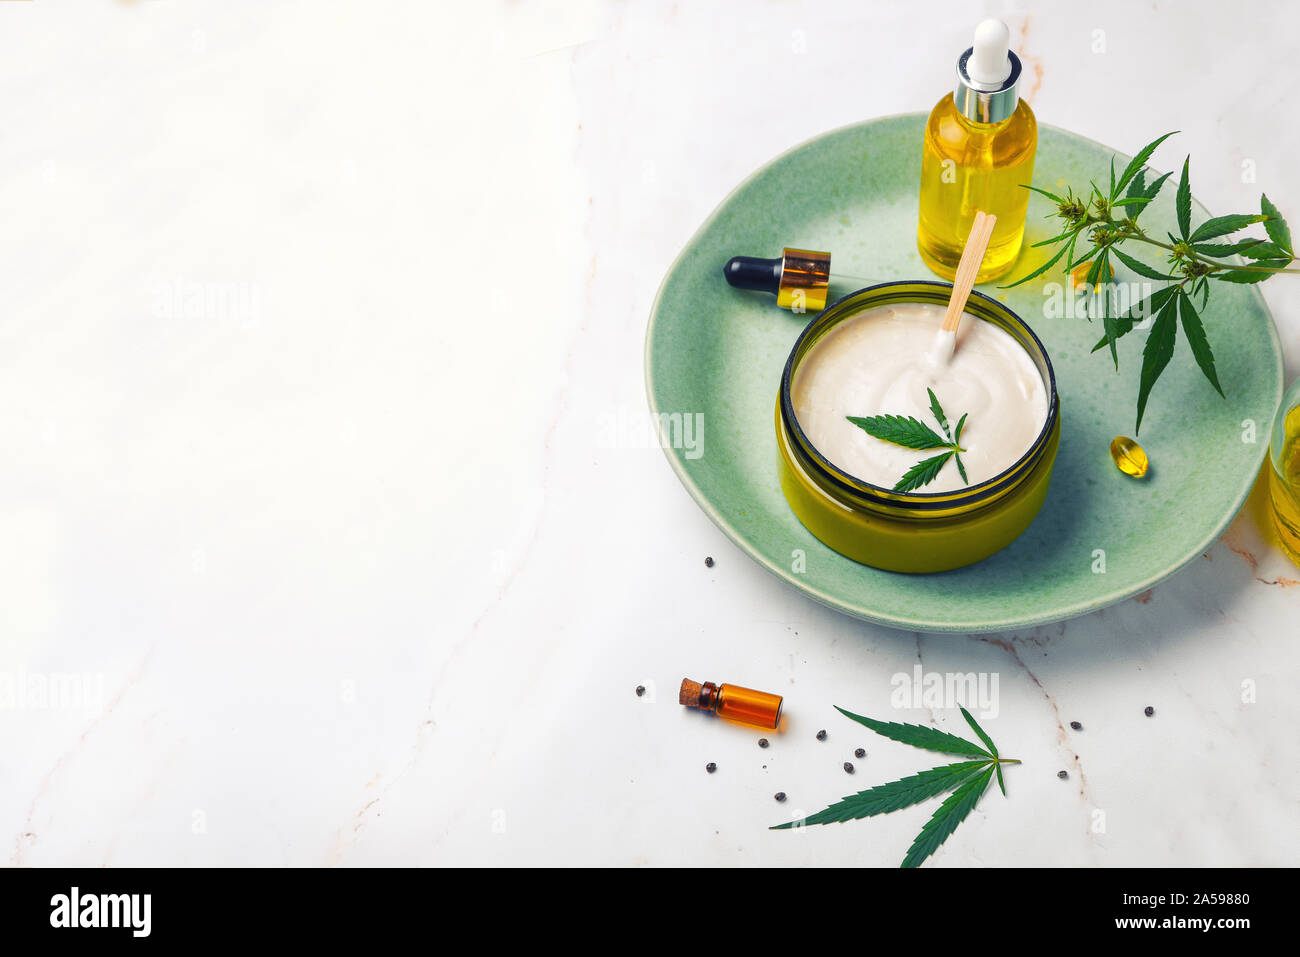 Bank of medicinal cream with CBD oil, a bottle of cannabis oil, capsules, on a green plate. Flat lay, top view. Cannabidiol CBD oils bottles with hemp Stock Photo